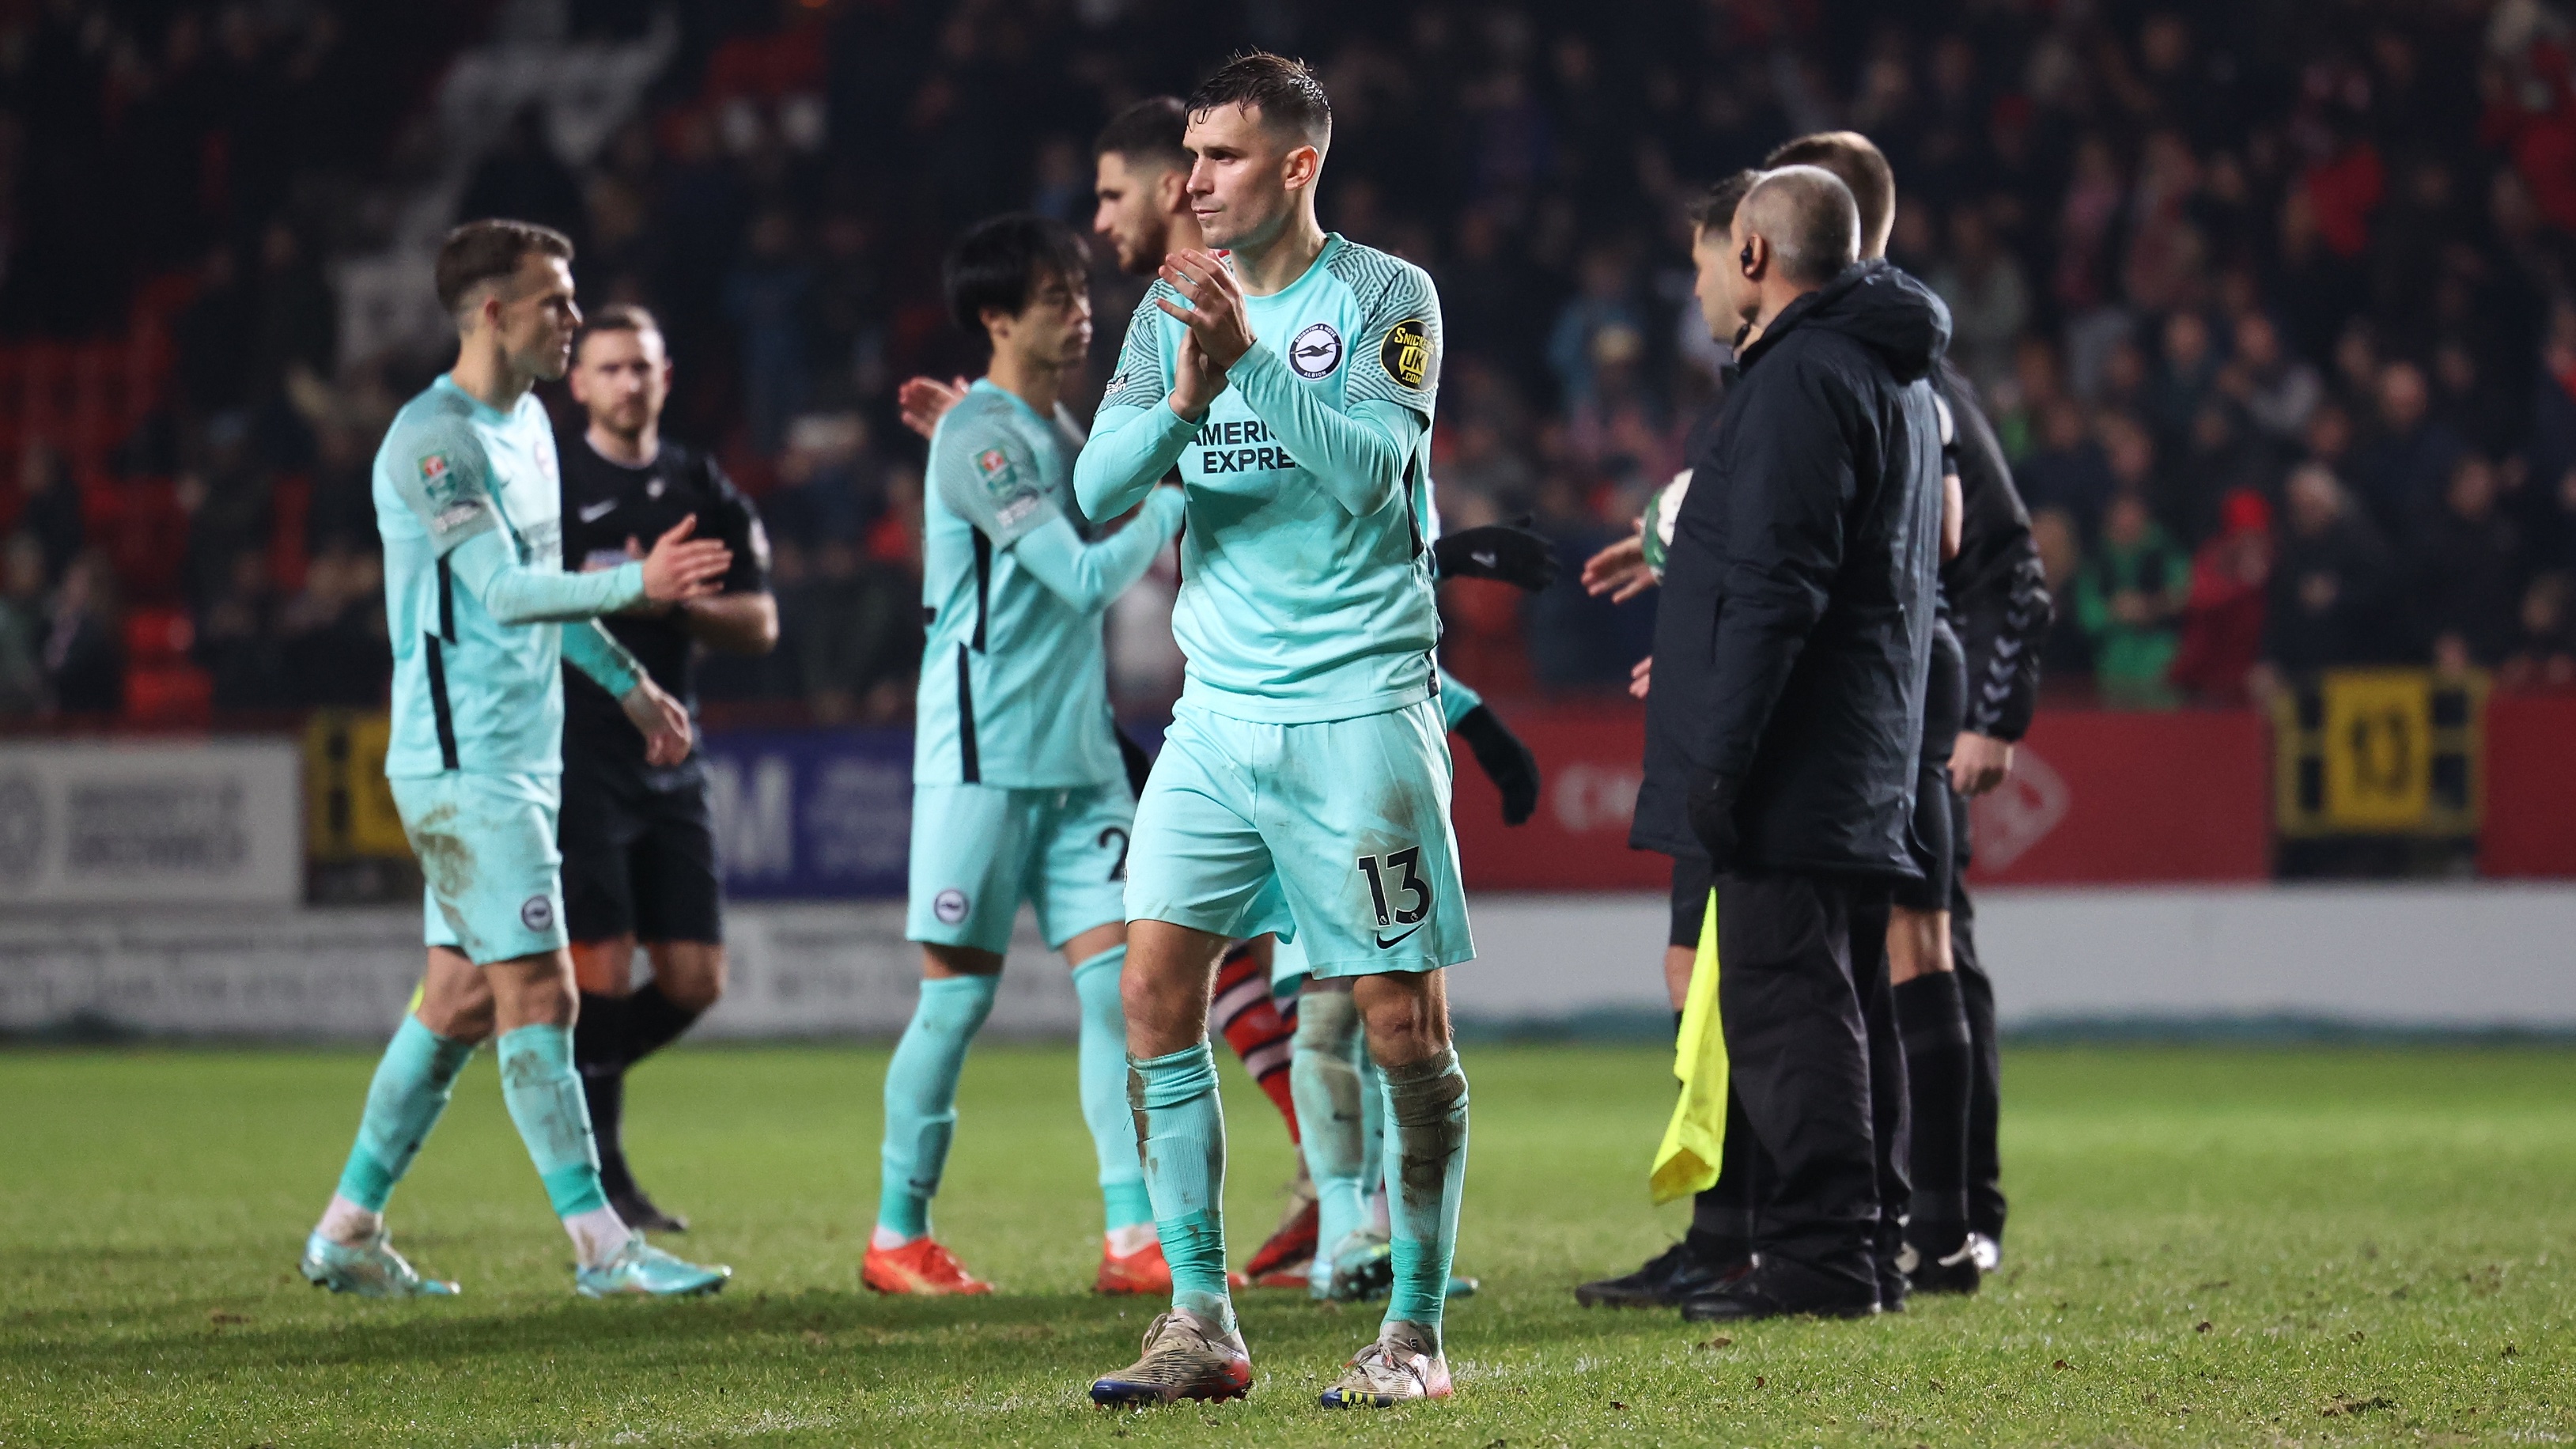 Pascal Gross shows his appreciation to the fans at full time at Charlton.